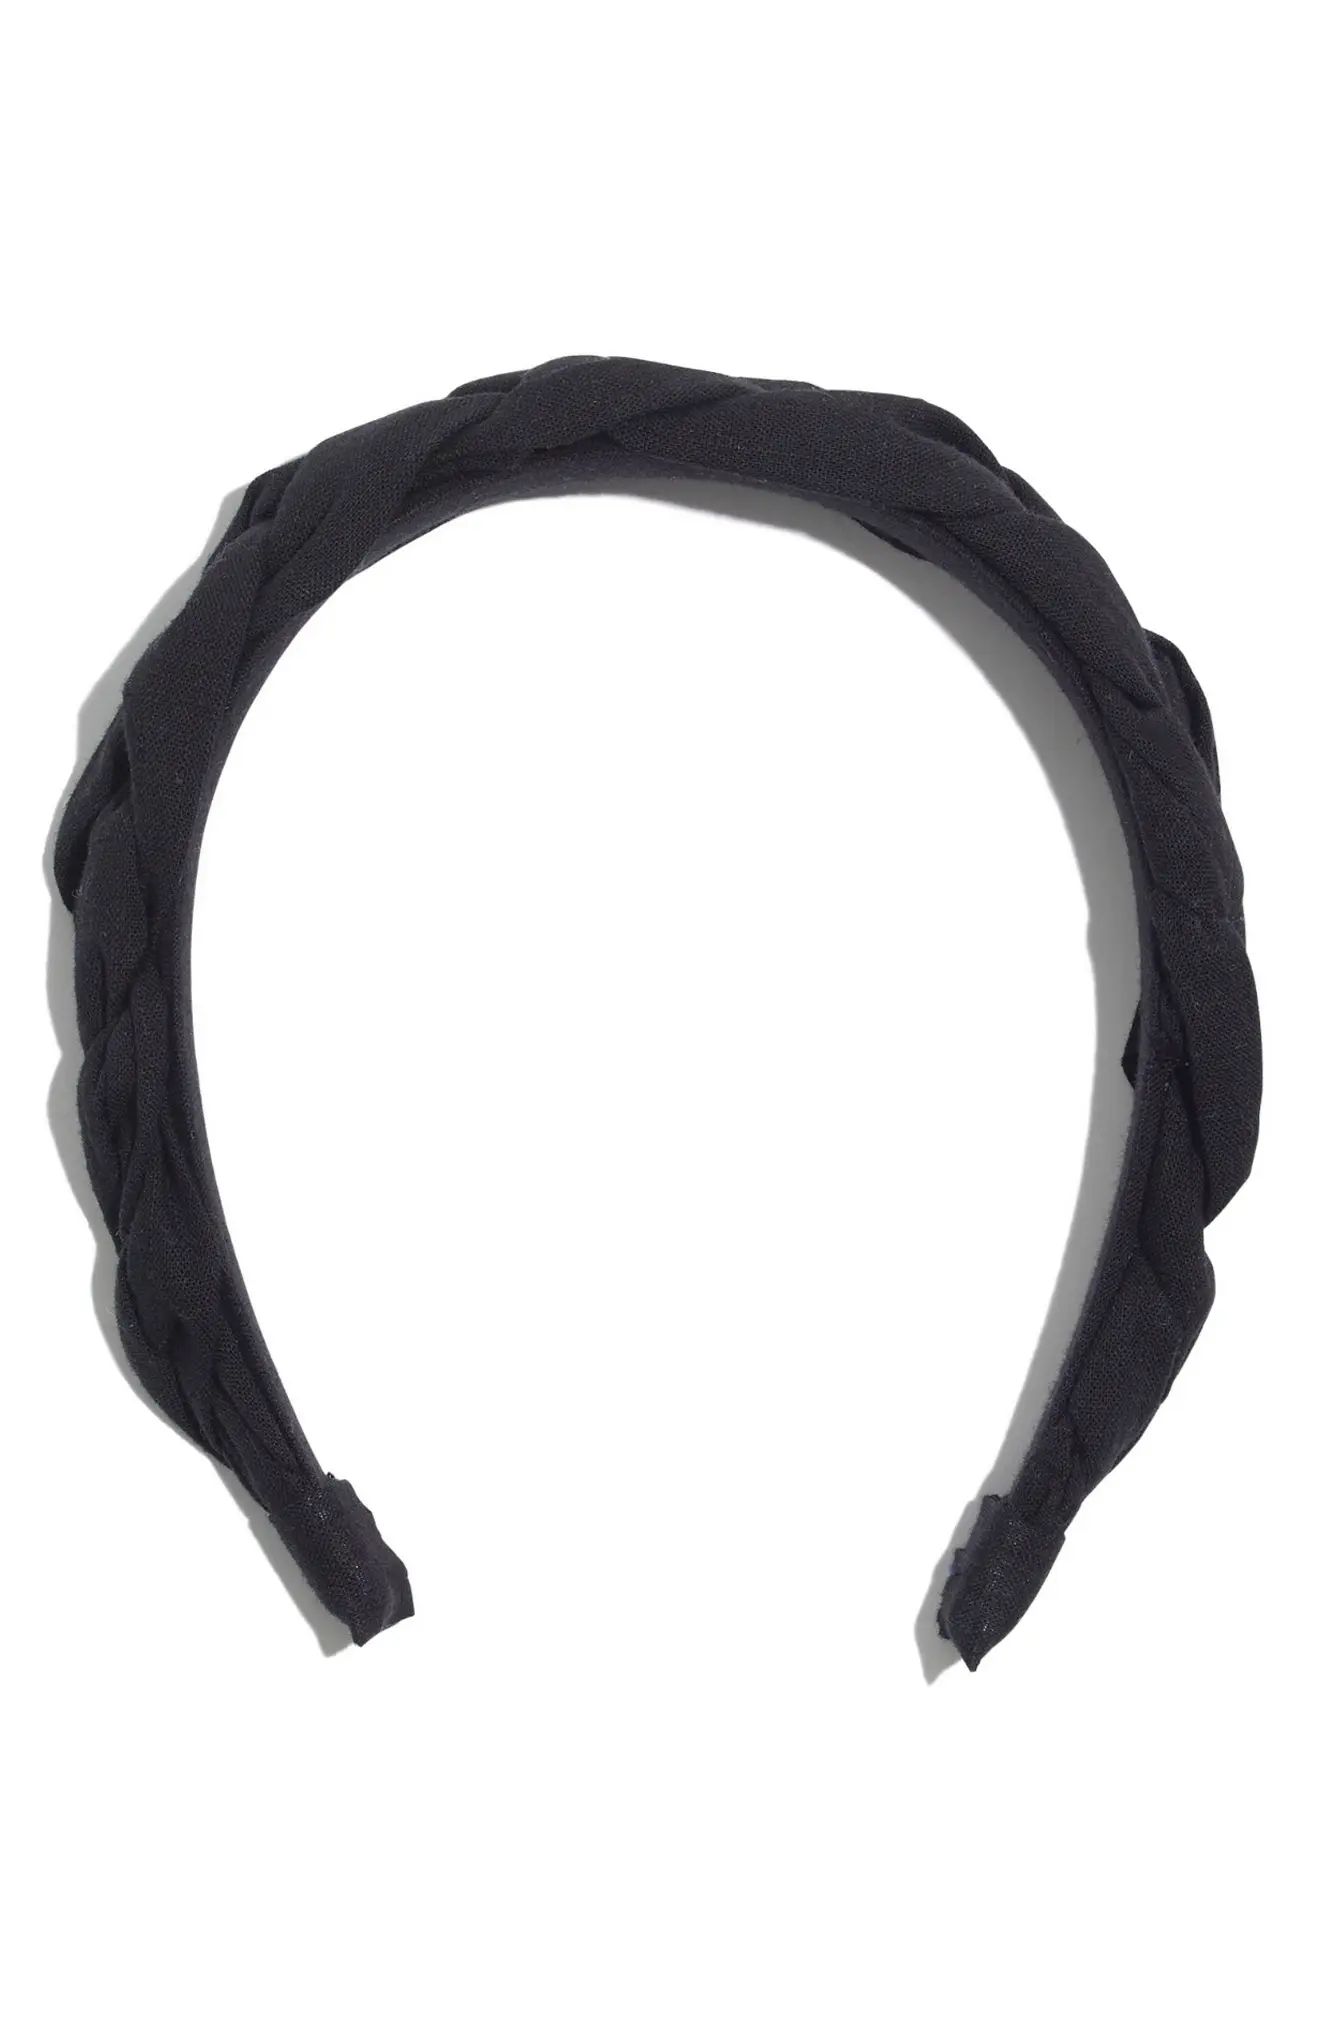 Madewell Puffy Braided Headband, Size One Size - Black | Nordstrom